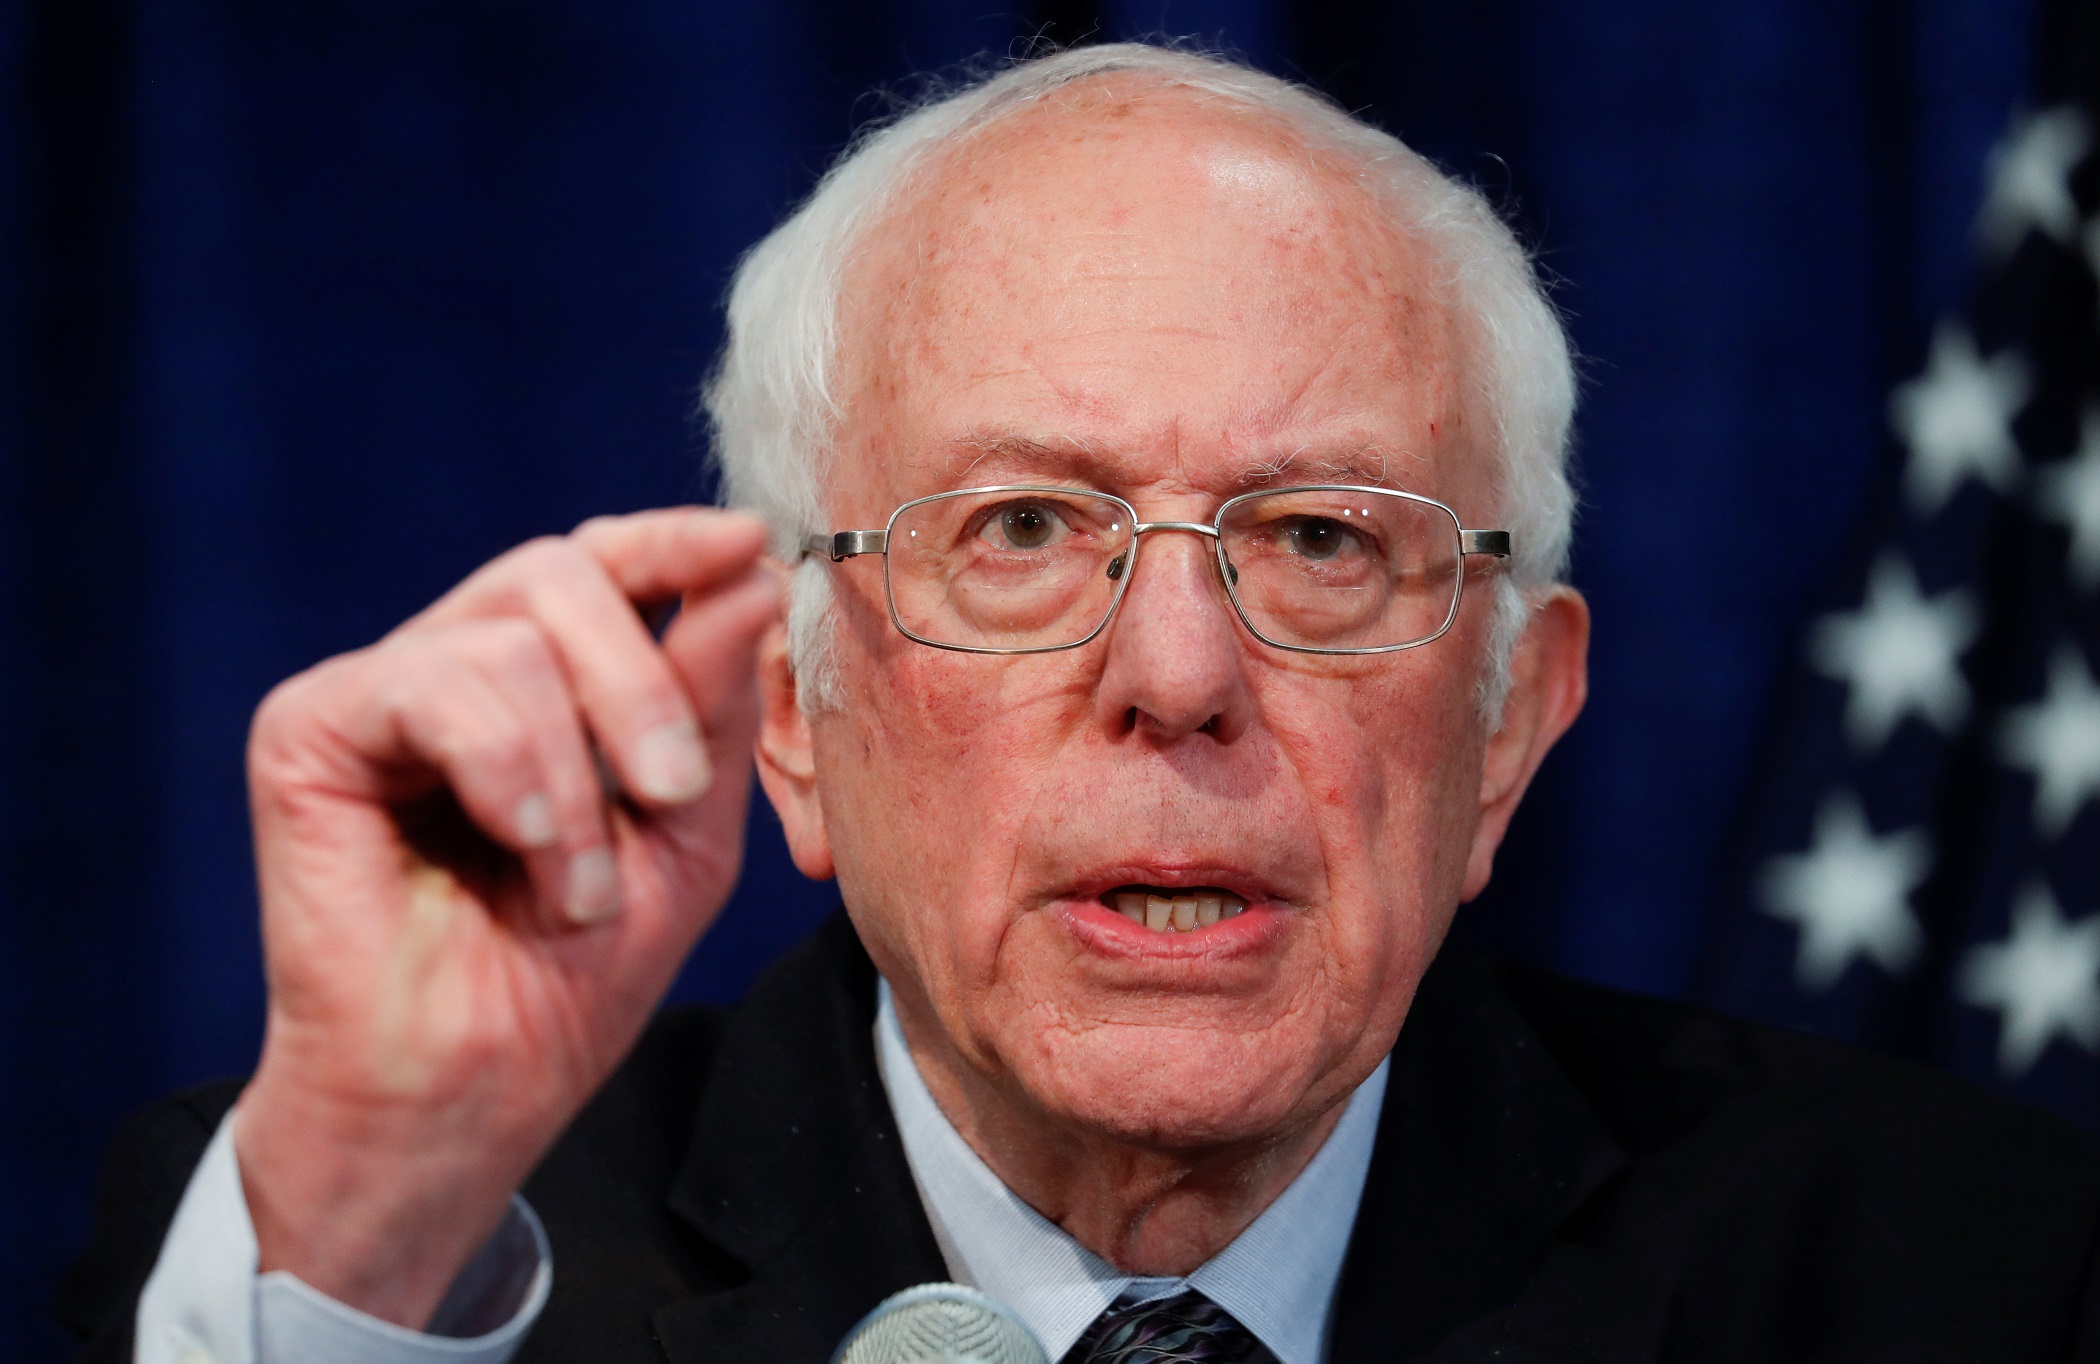 Bernie Sanders Has Big Plans For A Massive Tax Increase The National Interest 